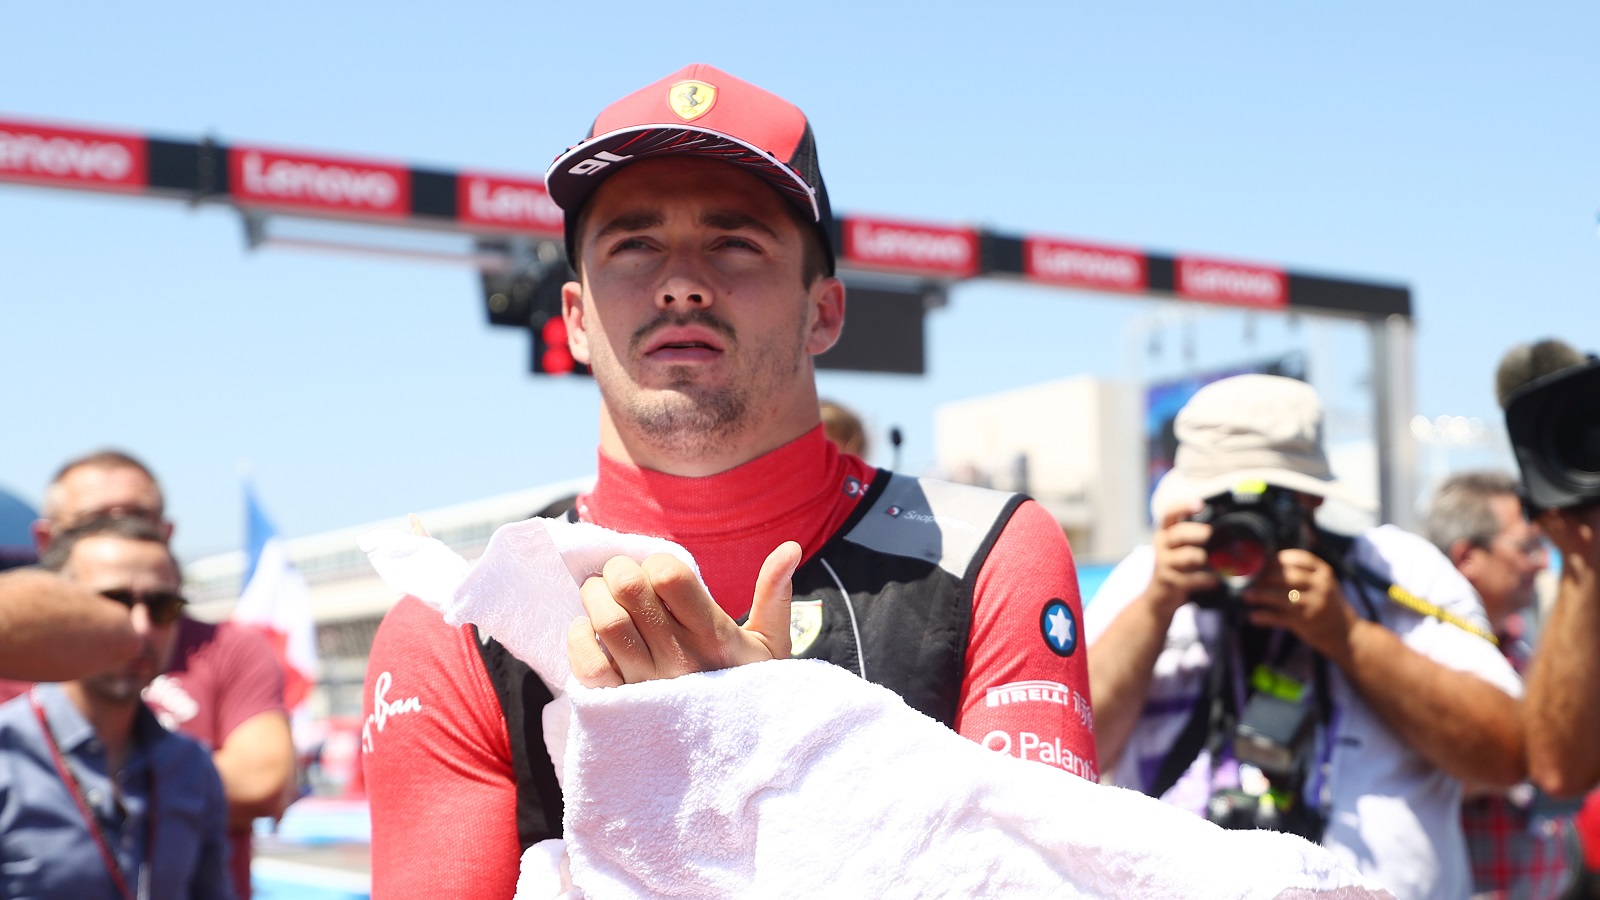 Scuderia Ferrari's Charles Leclerc prepares on the grid during the Formula 1 Grand Prix of France at Circuit Paul Ricard on July 24, 2022.